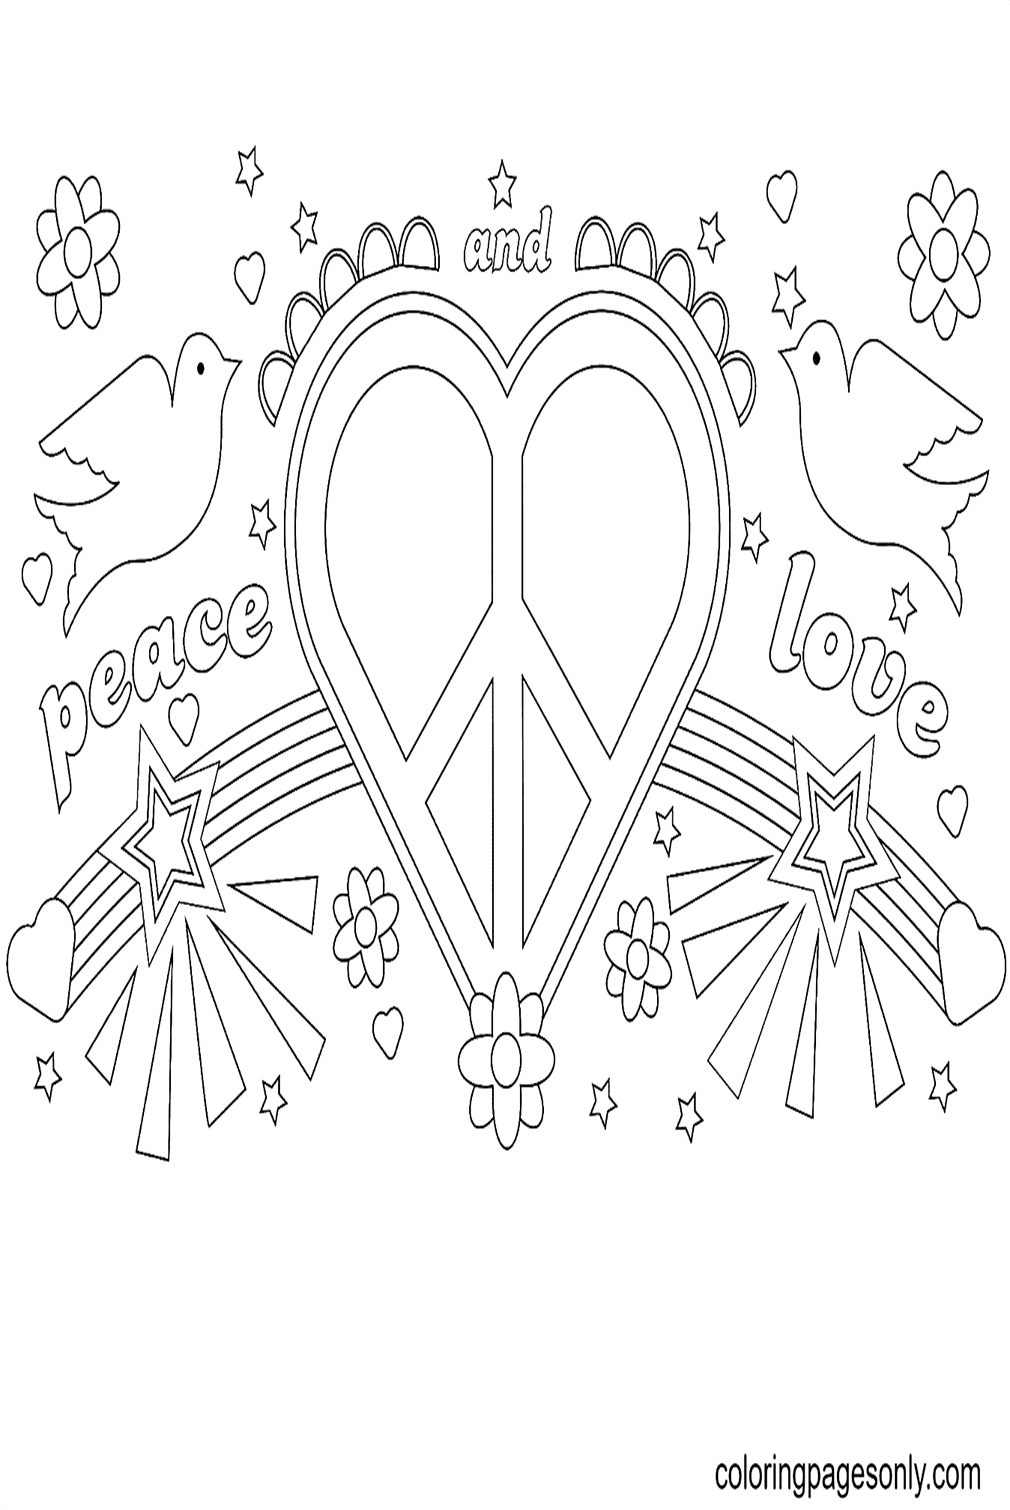 Peace and Love Coloring Page